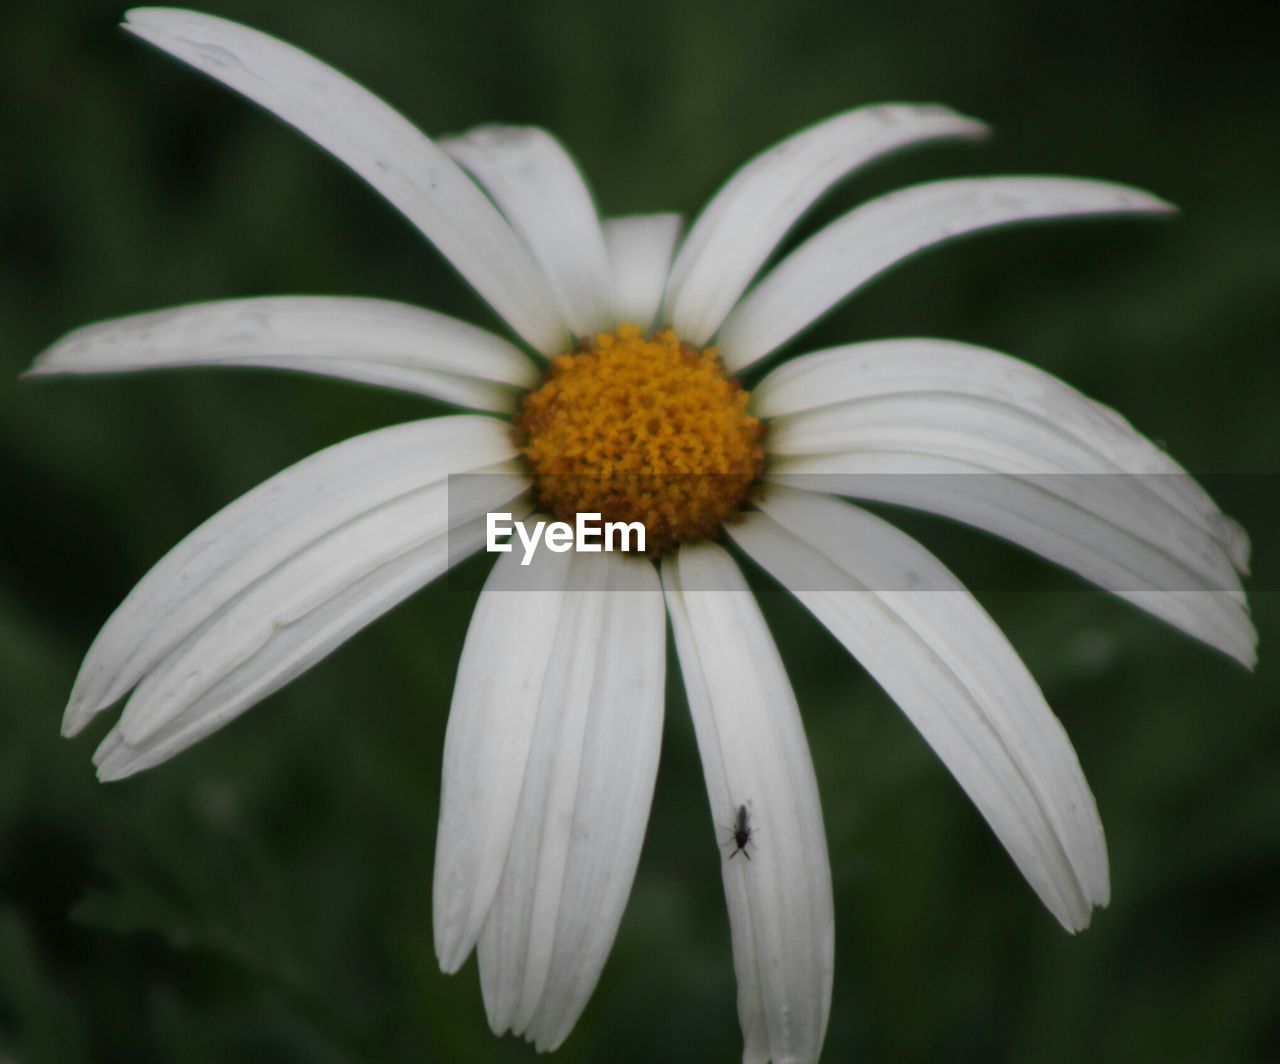 CLOSE-UP OF WHITE DAISY FLOWERS